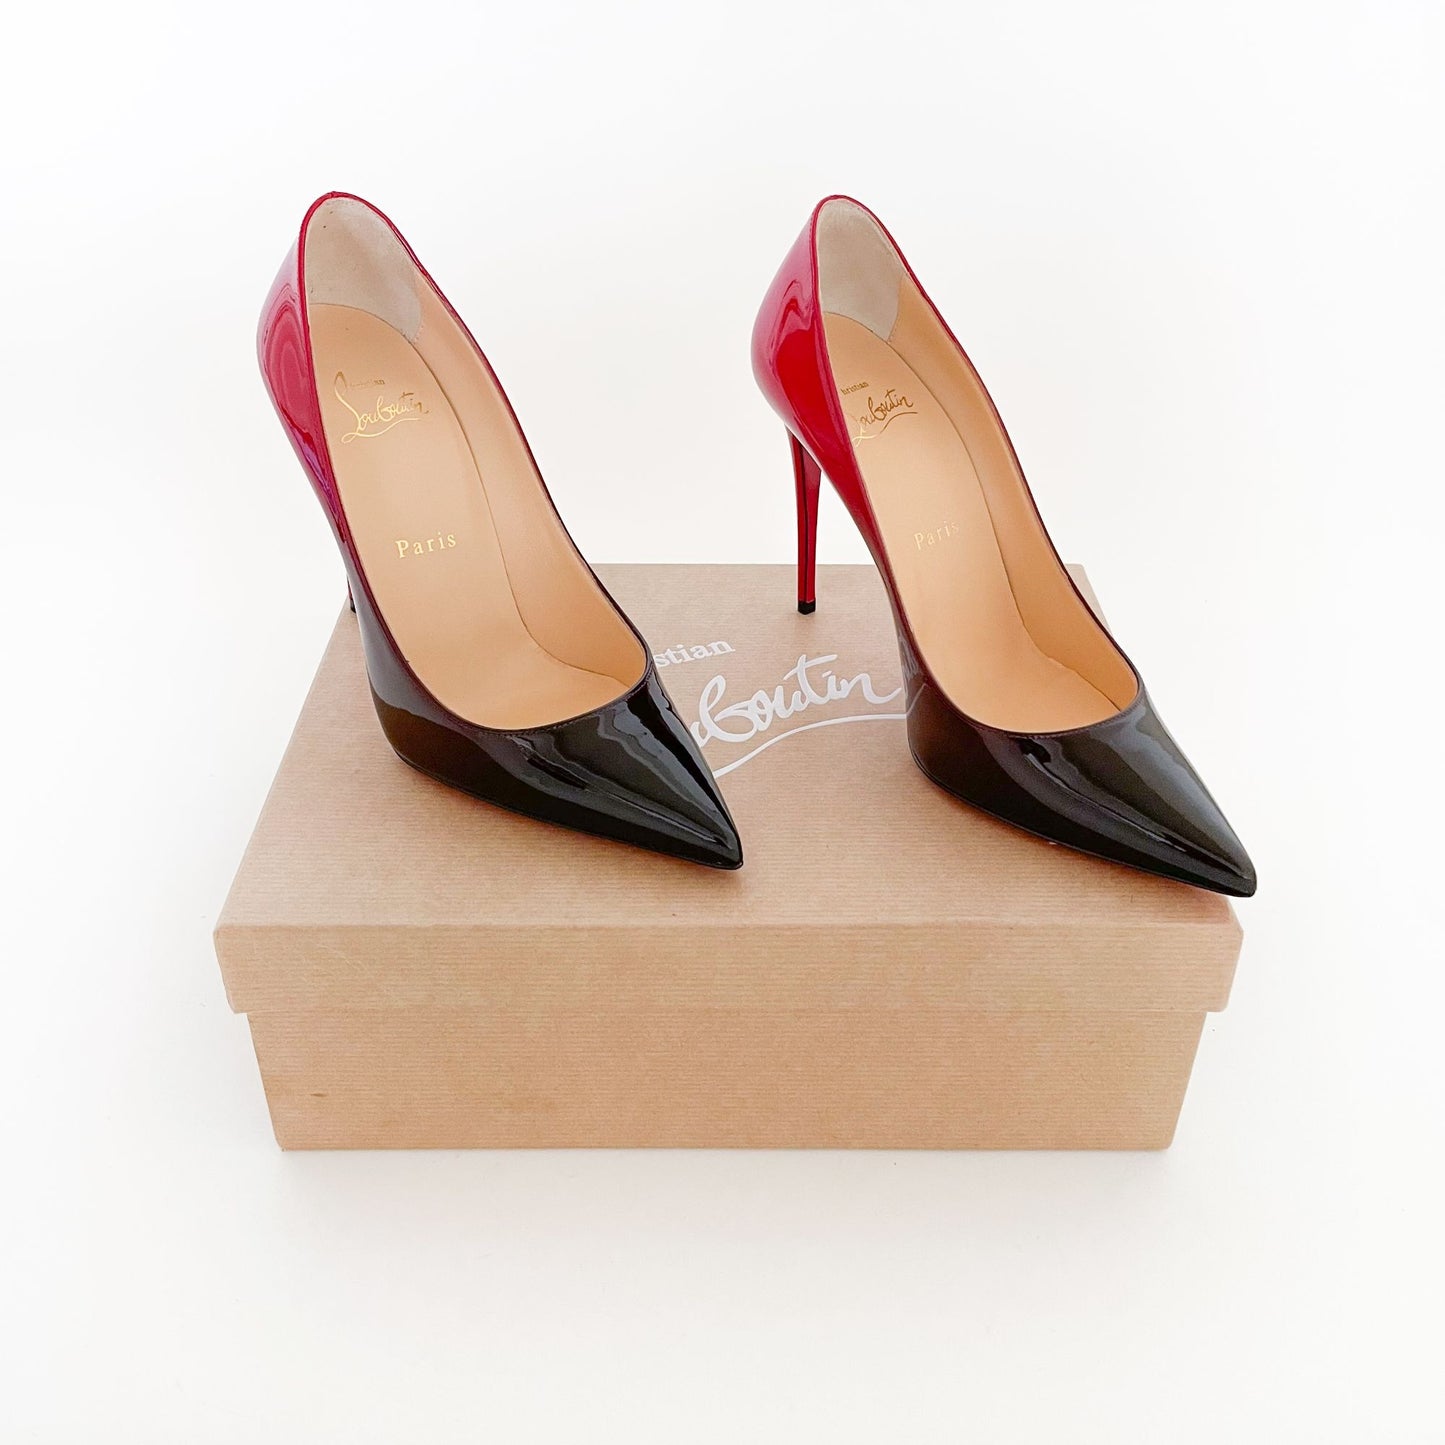 Christian Louboutin Kate 100 Pumps in Black-Red Patent Degrade Size 36.5